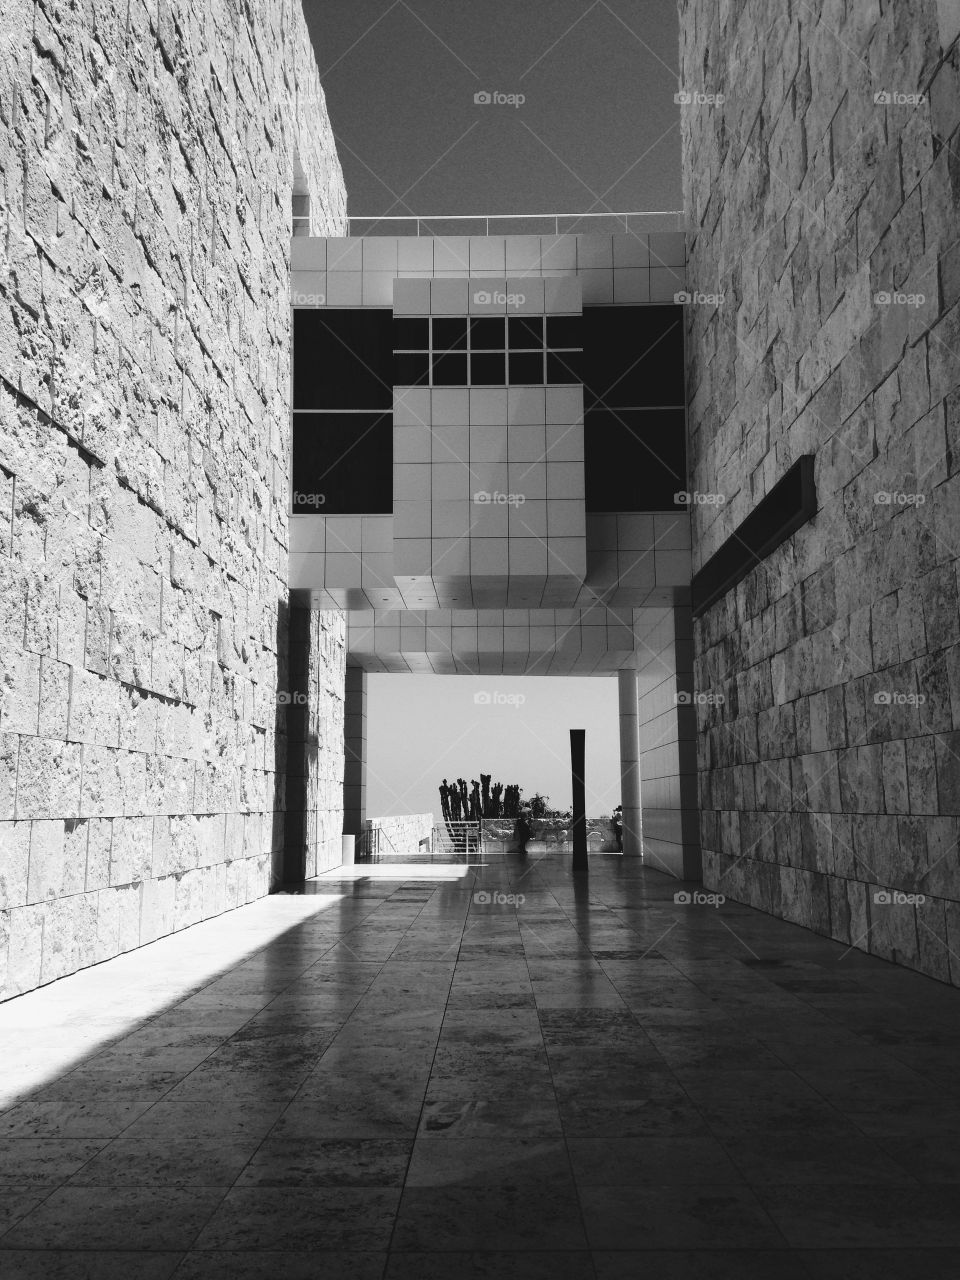 Getty Center . Architecture of the Getty Center in Los Angeles